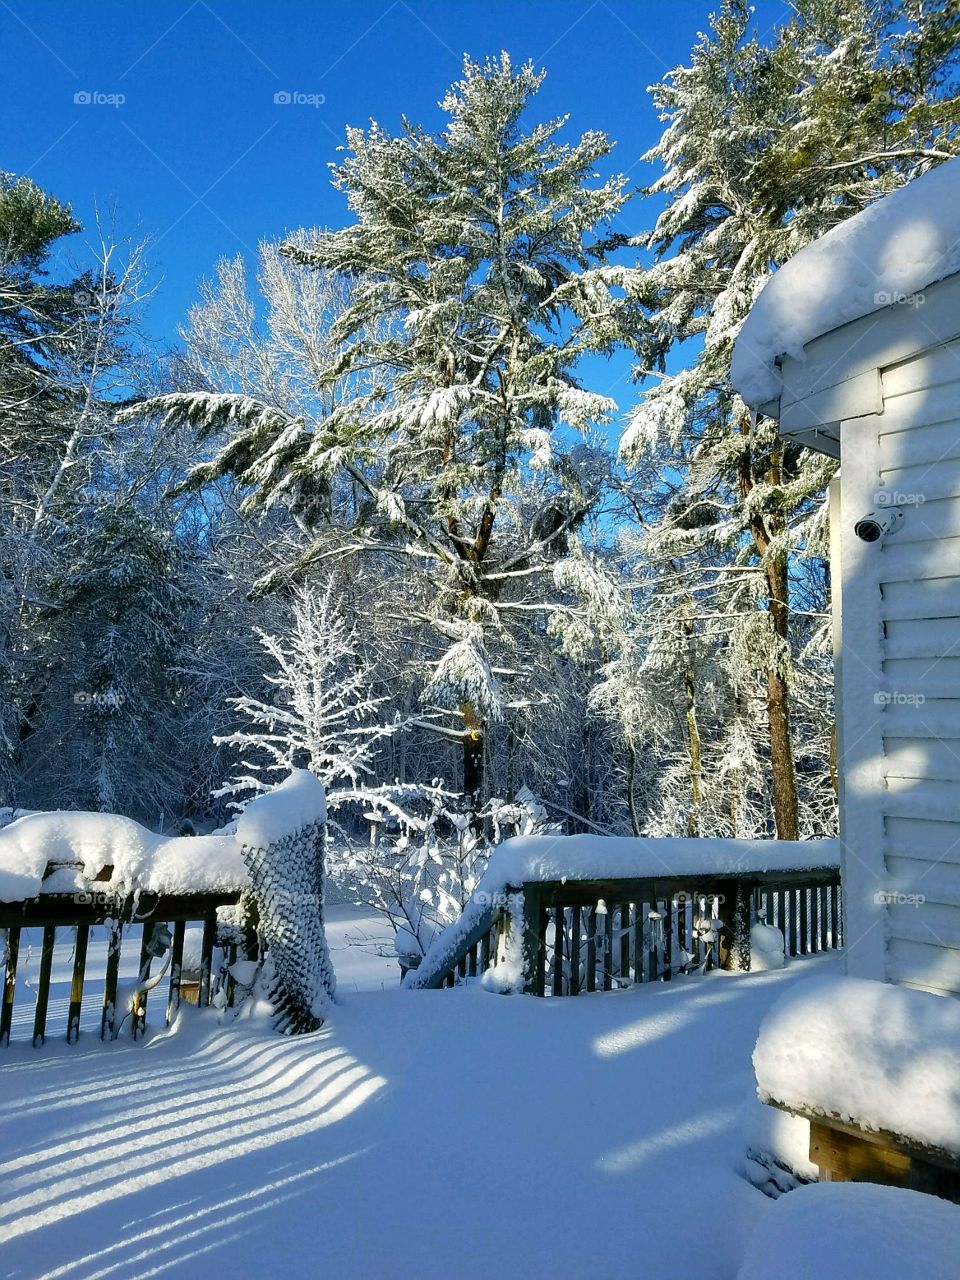 After snowstorm pic of back porch covered in snow. Clear blue sky, tree branches in woods covered in snow too. Sun casting shadows.